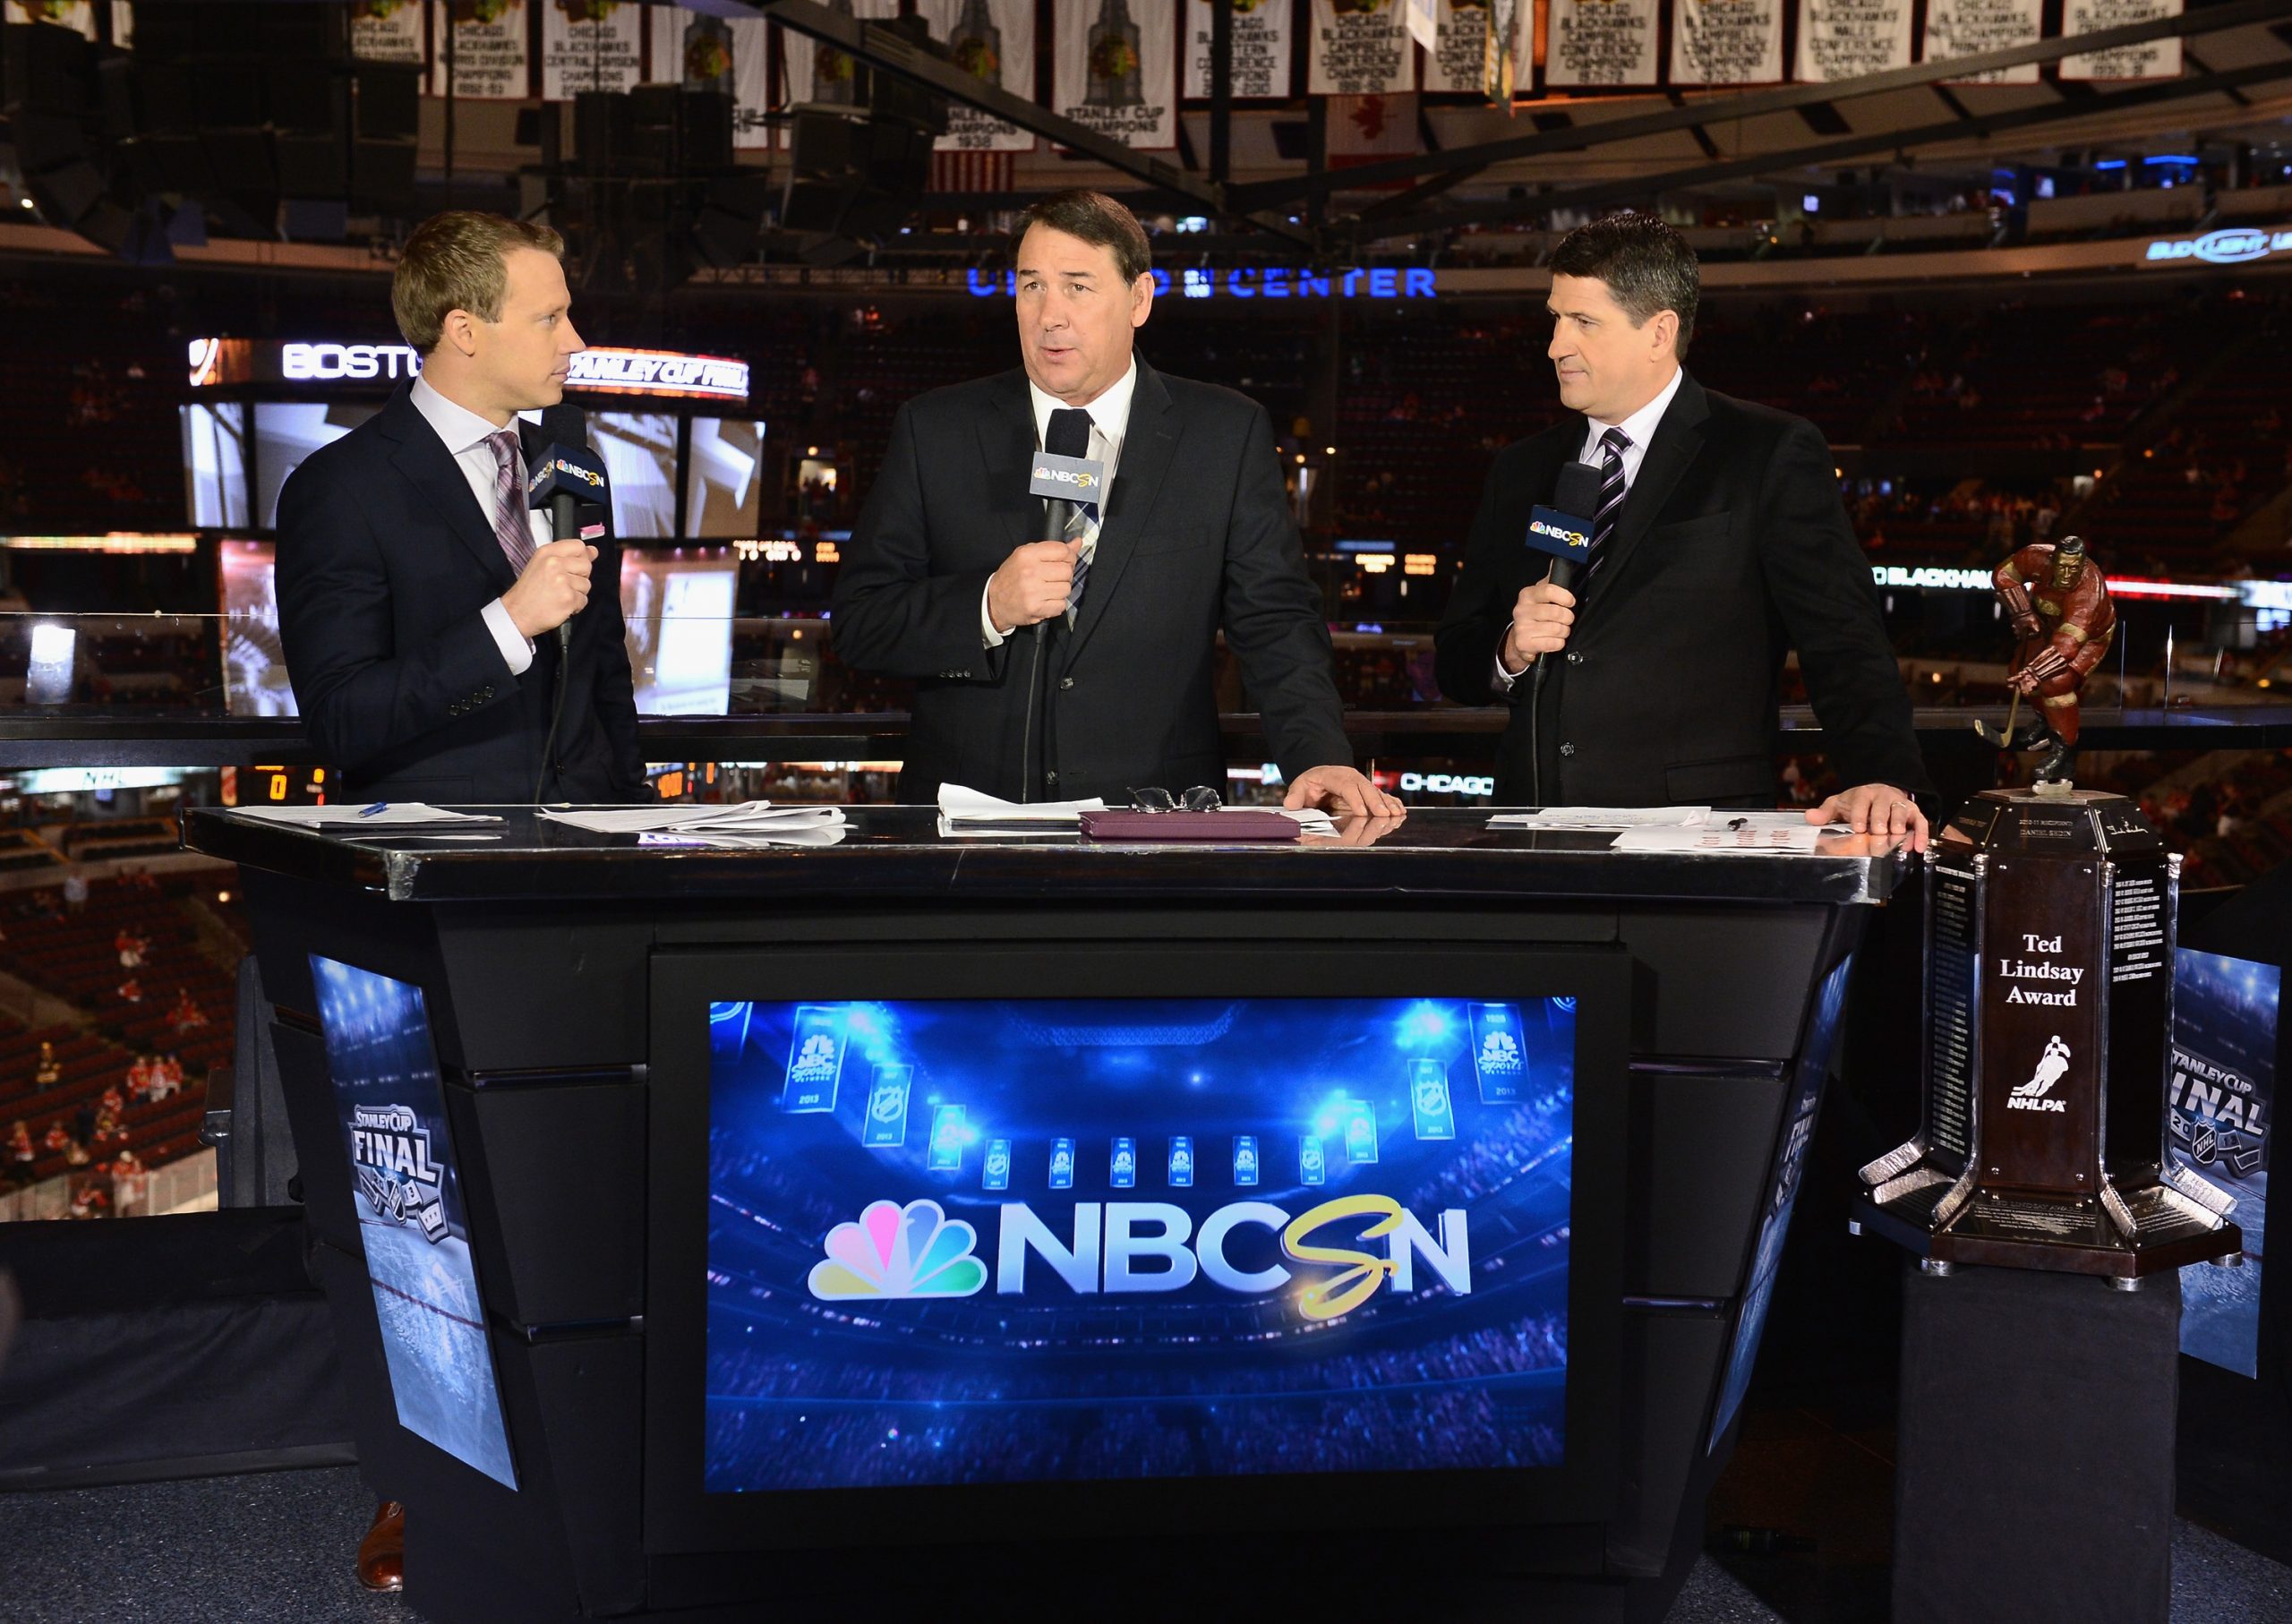 (L-R) NBC hockey analysts Liam McHugh, Mike Milbury and Keith Jones discuss Game 2 of the 2013 Stanley Cup Final.